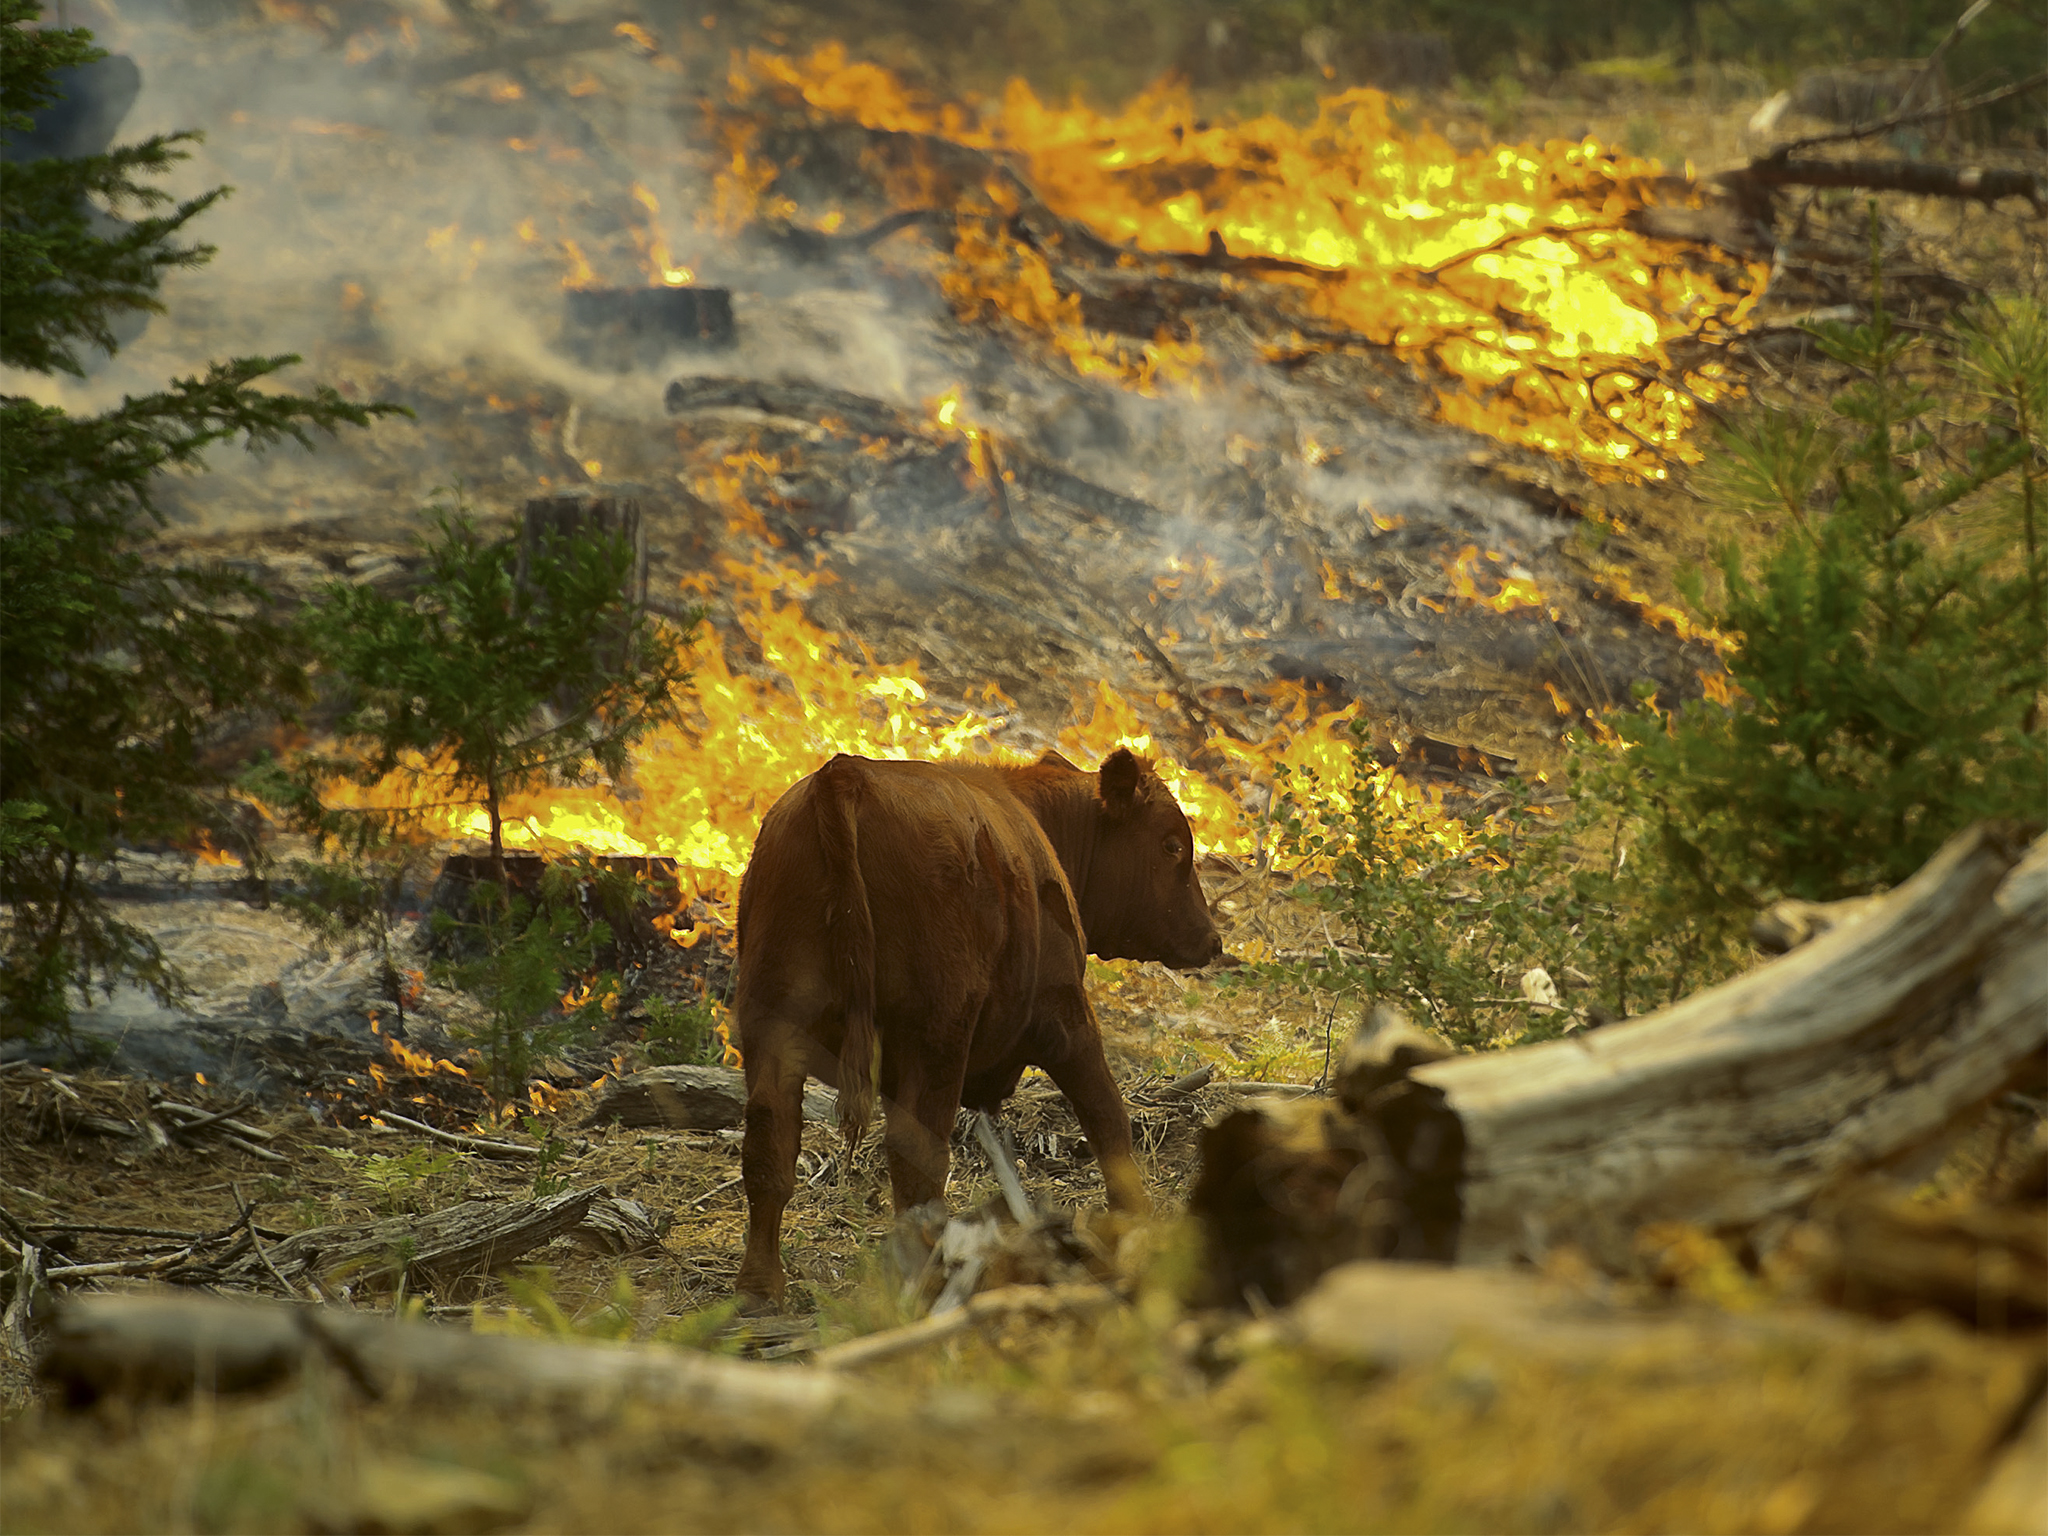 What Do Wild Animals Do in a Wildfire?